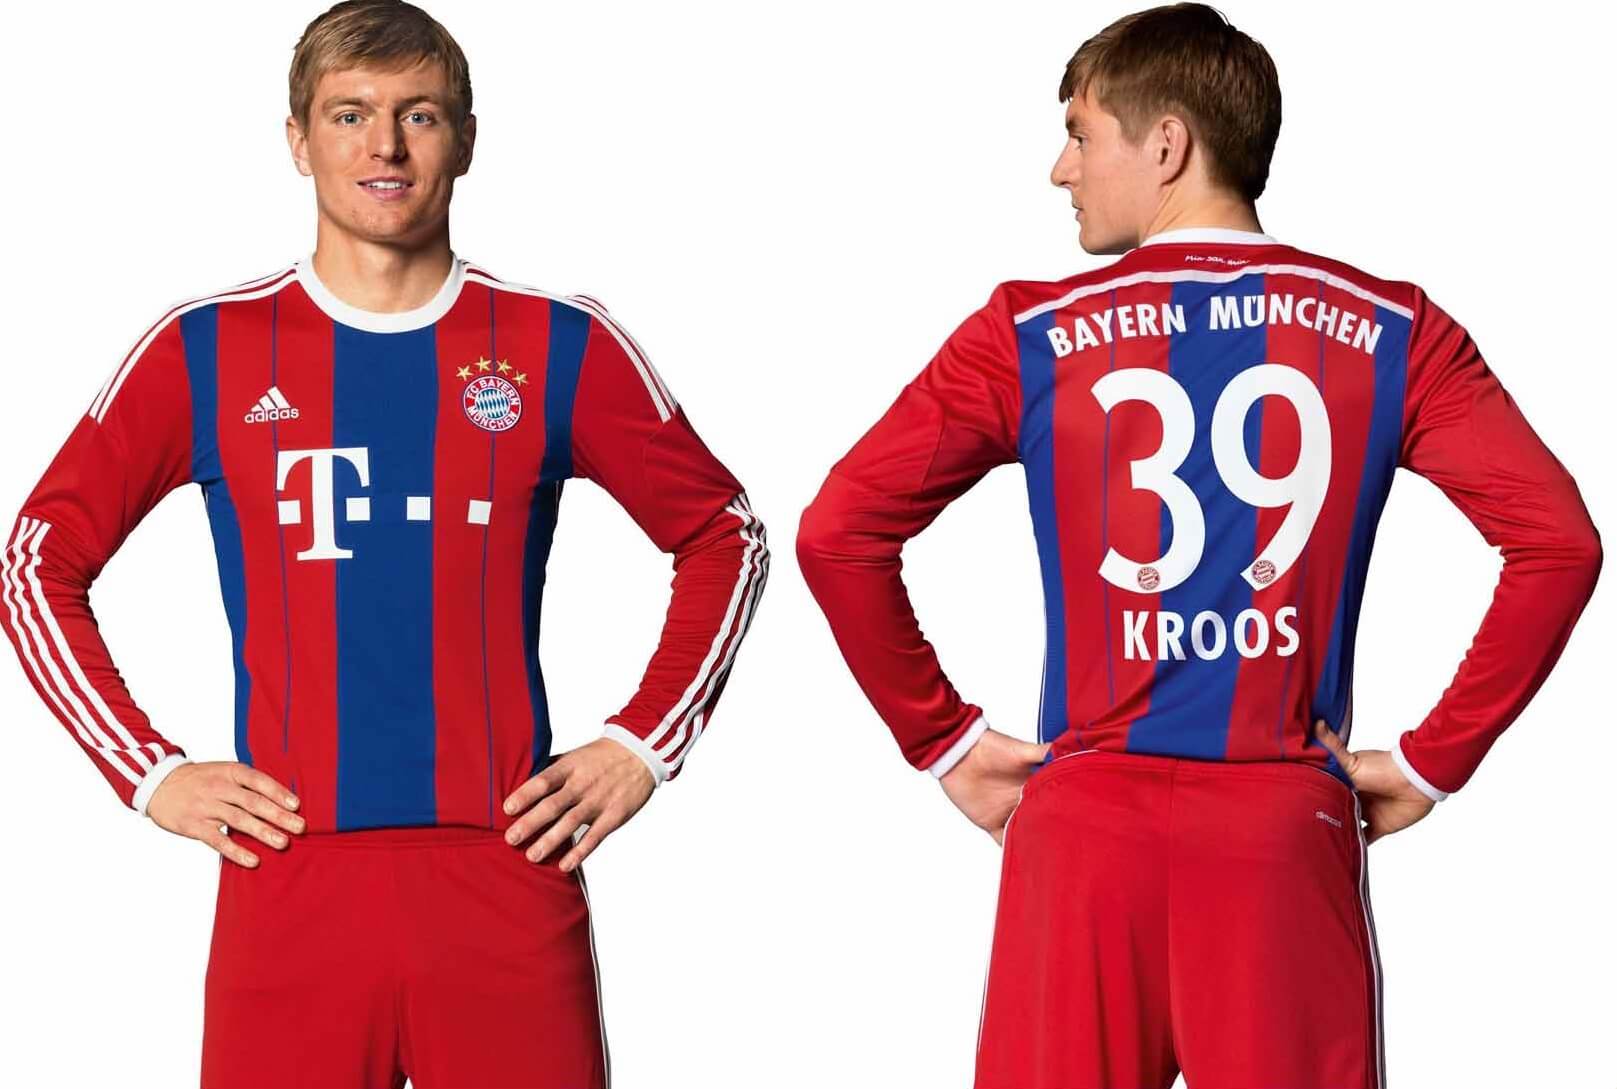 Bayern Munich New 2014-15 Home Kit Released